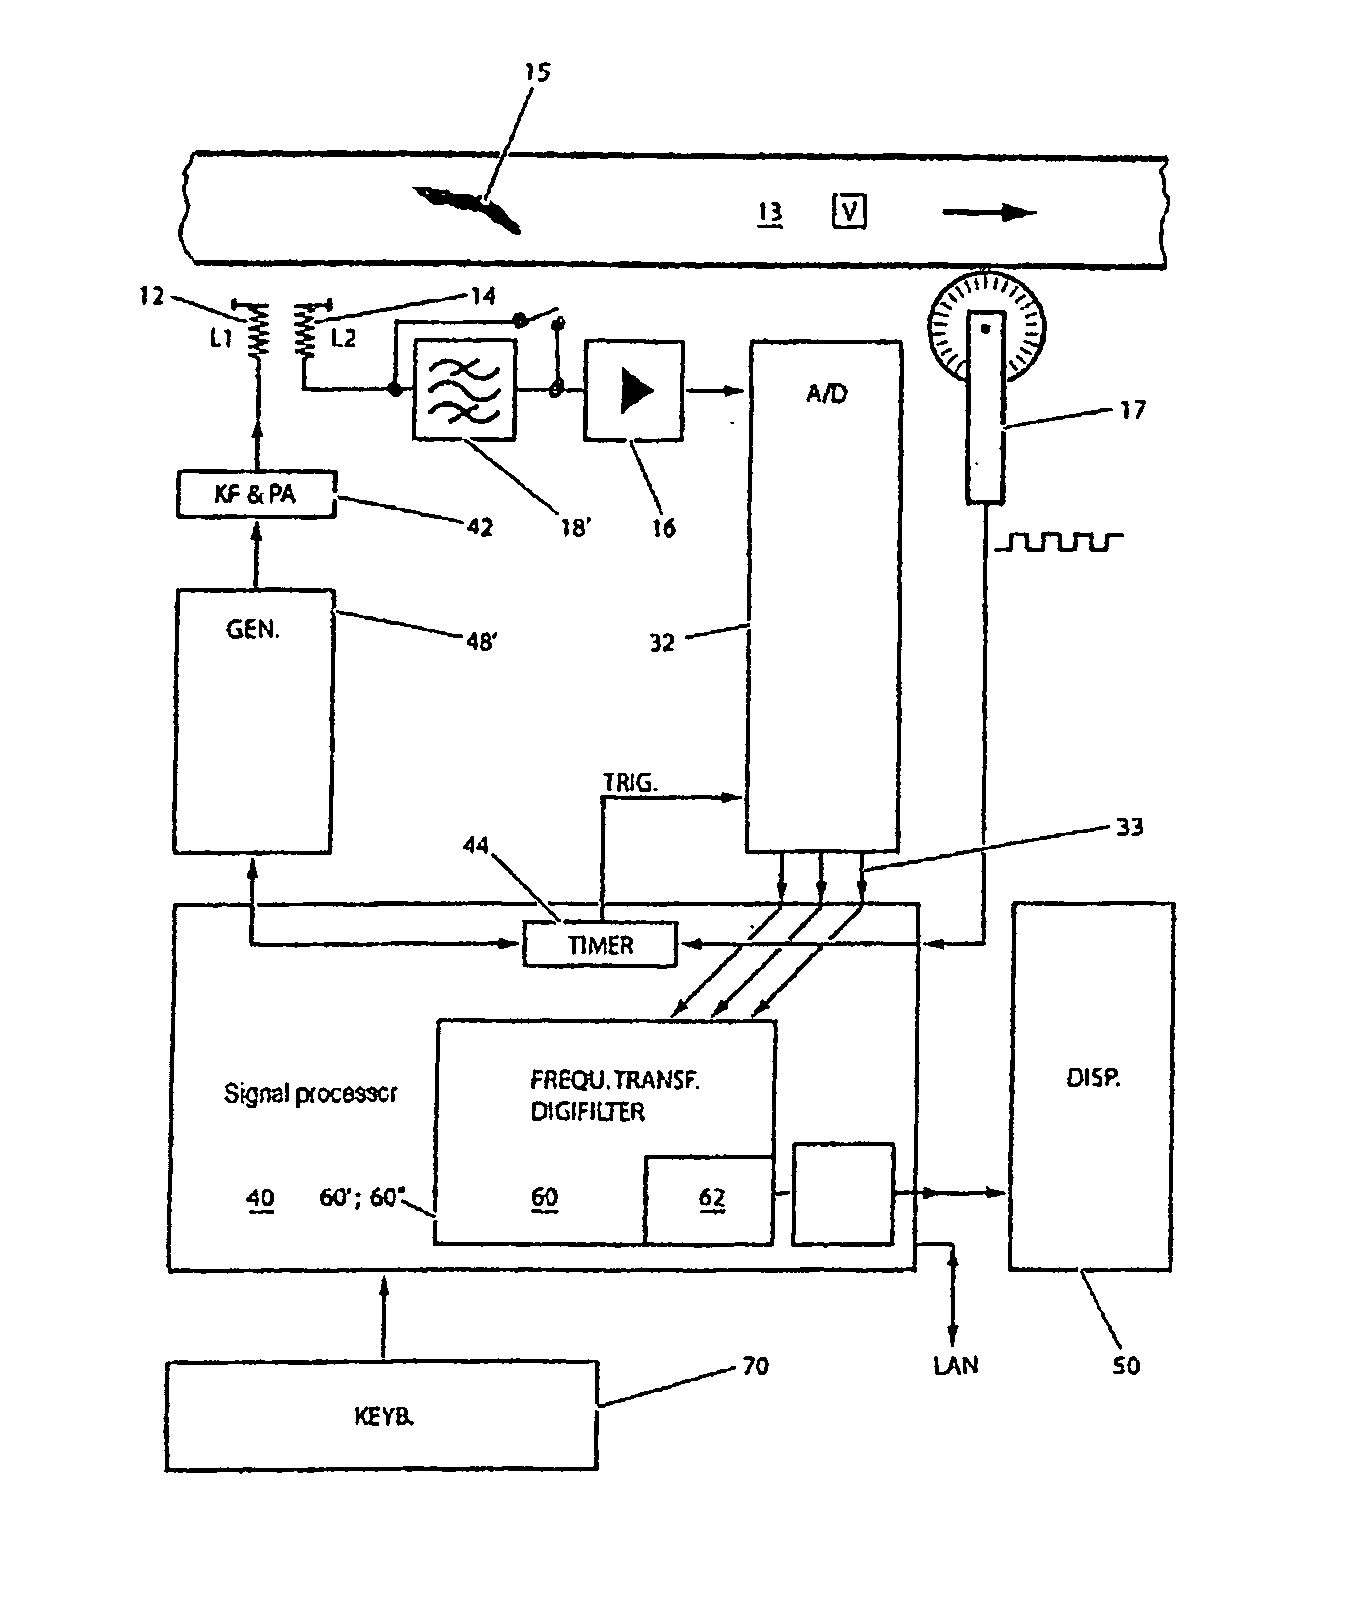 Device and Method for Detecting Flaws on Objects or Locating Metallic Objects